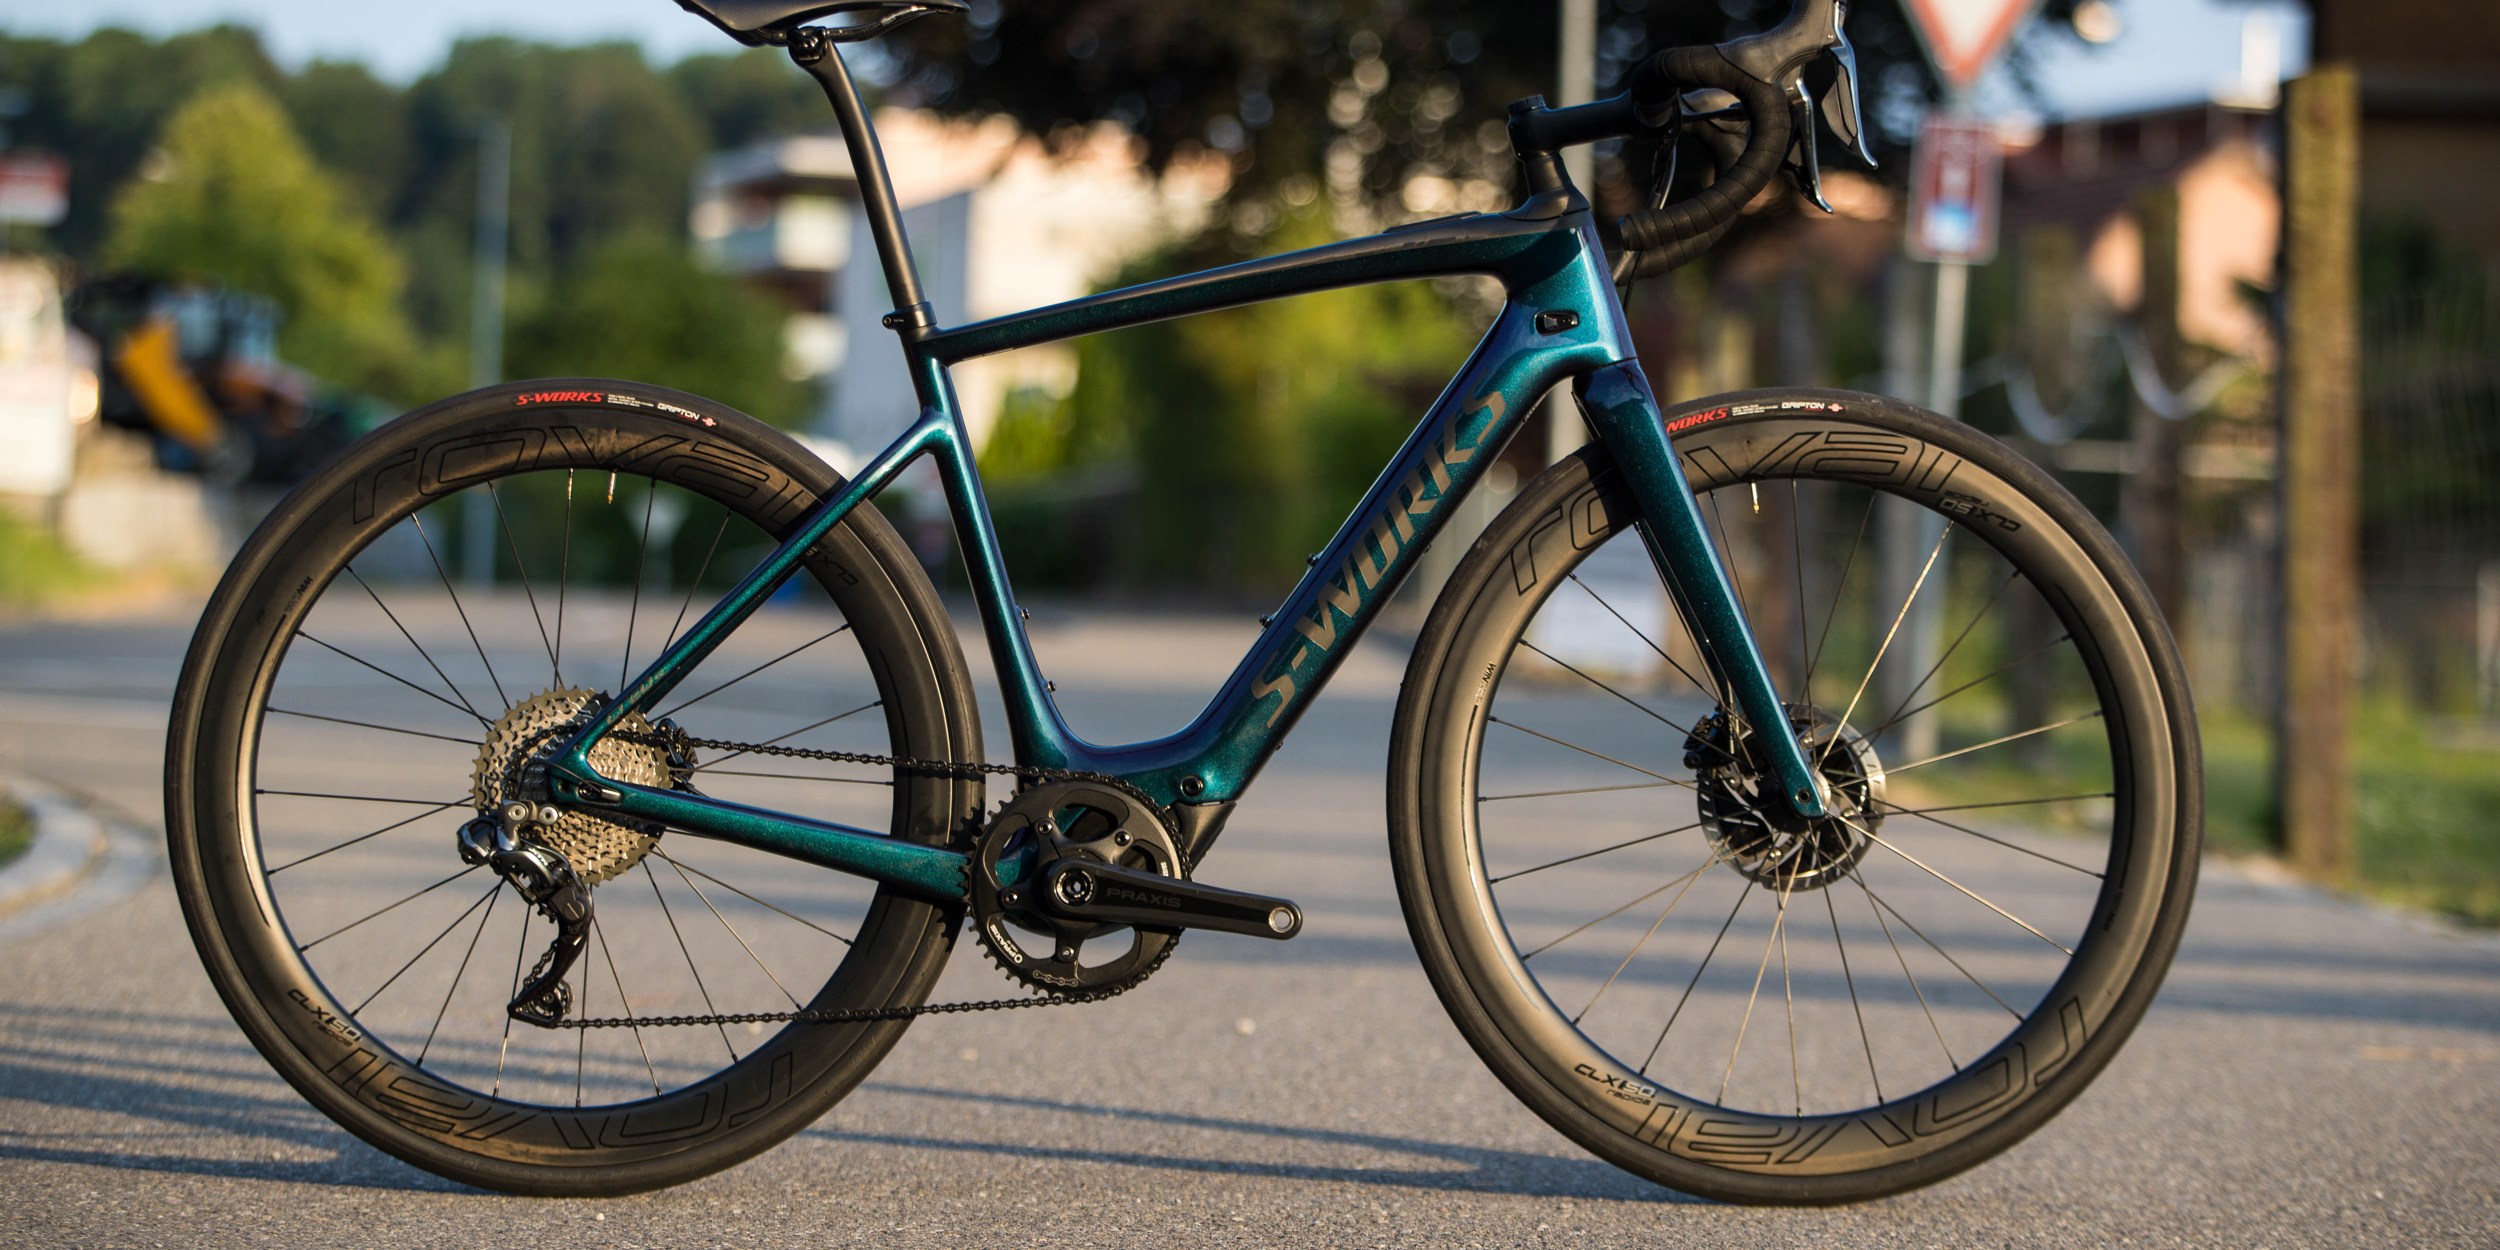 Specializeds new 120 mile range Turbo Creo SL e-bike costs up $17,000